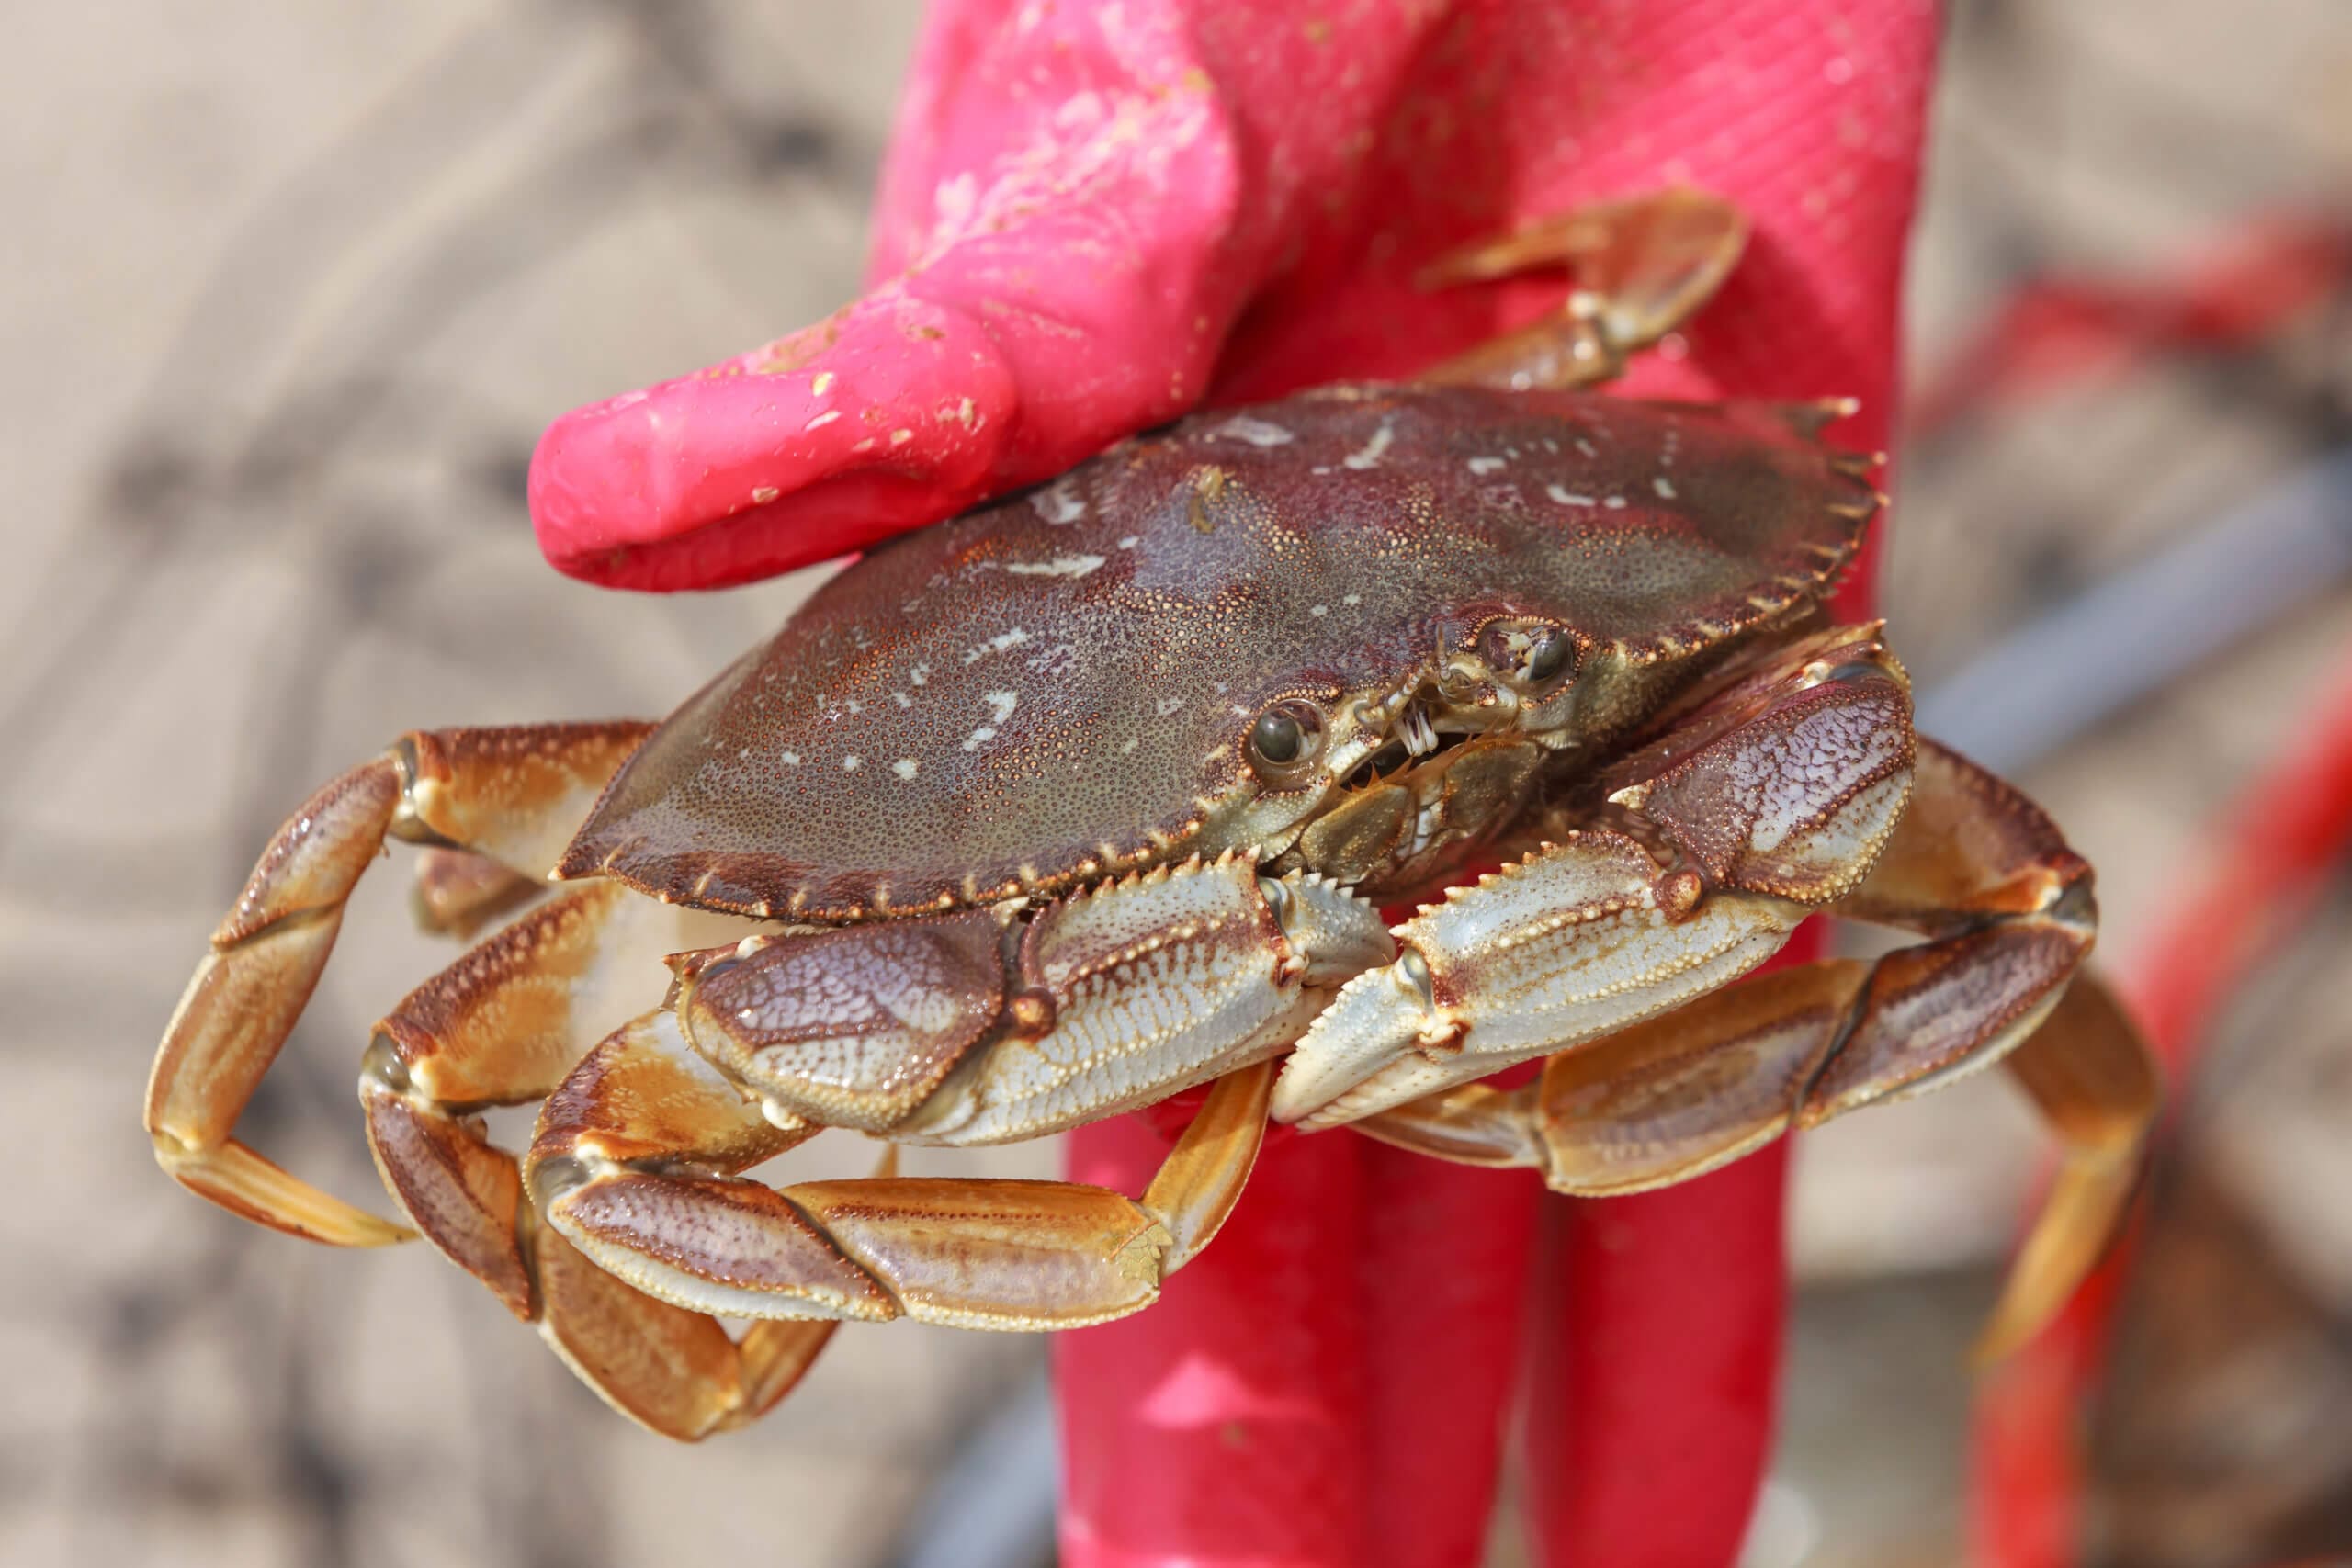 About Crabbing